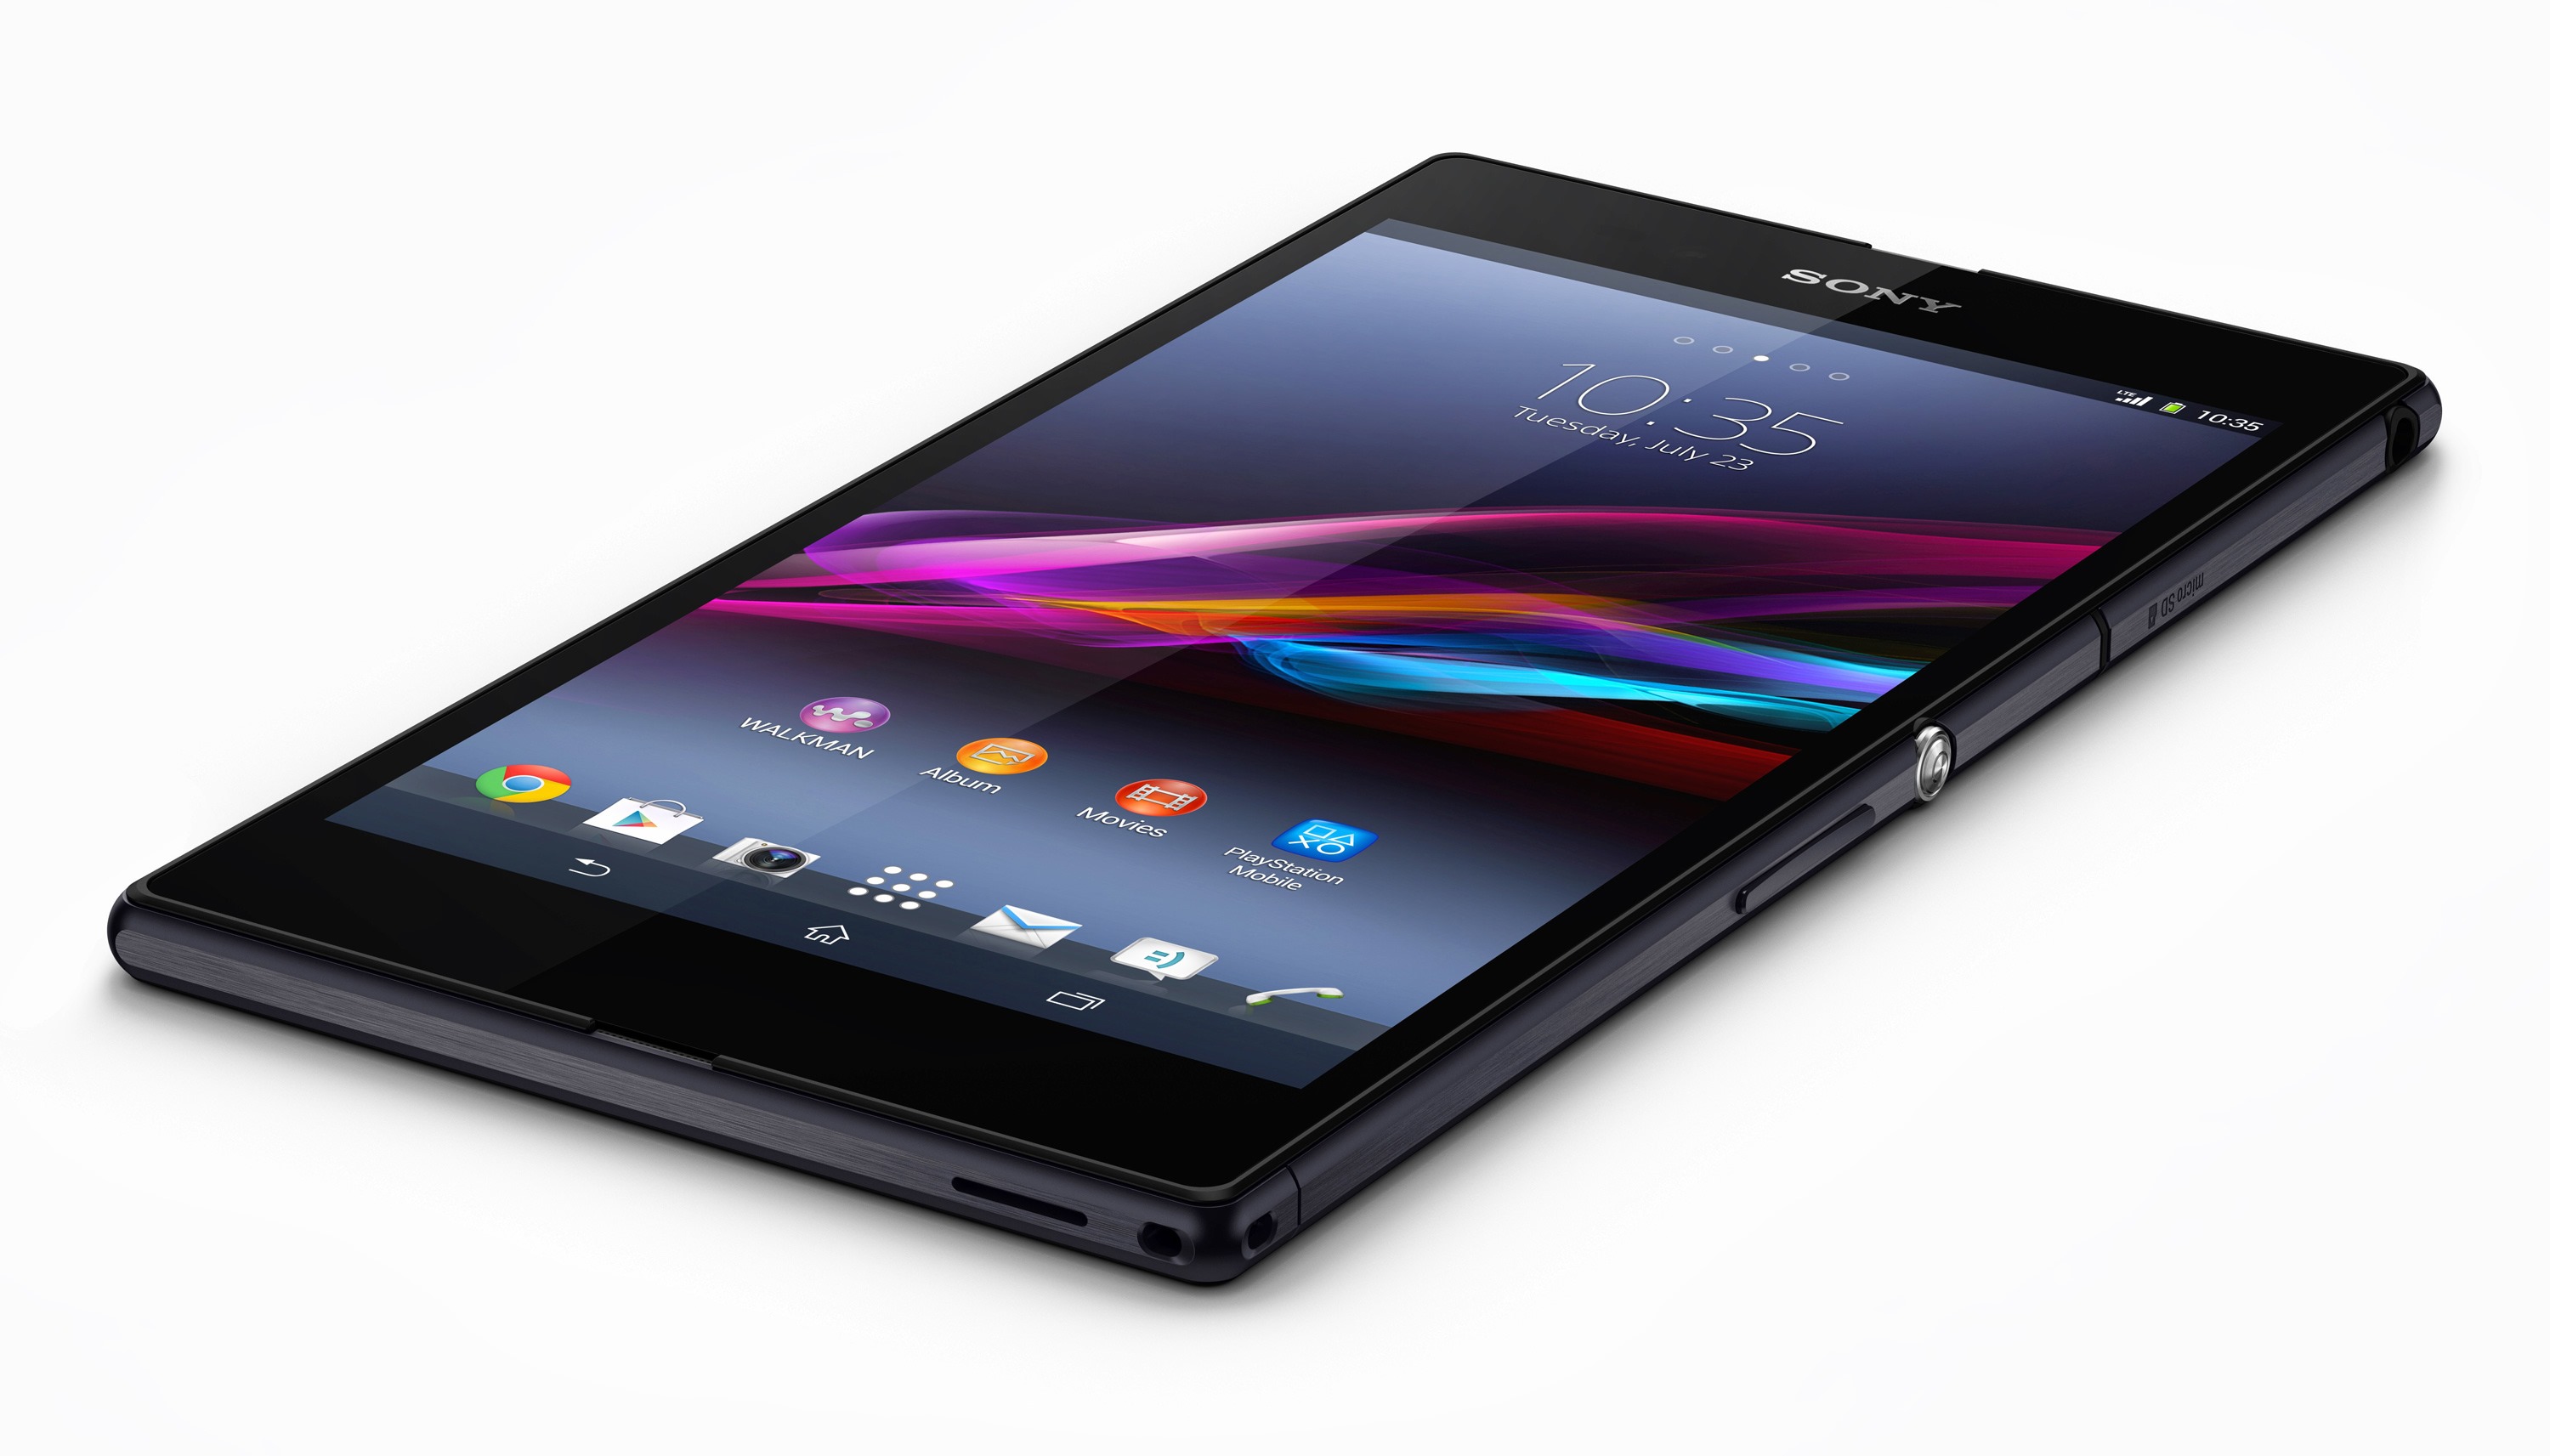 Sony Xperia Z1, Z1 Compact and Z Ultra updated to Android 5.0.2 Lollipop 2